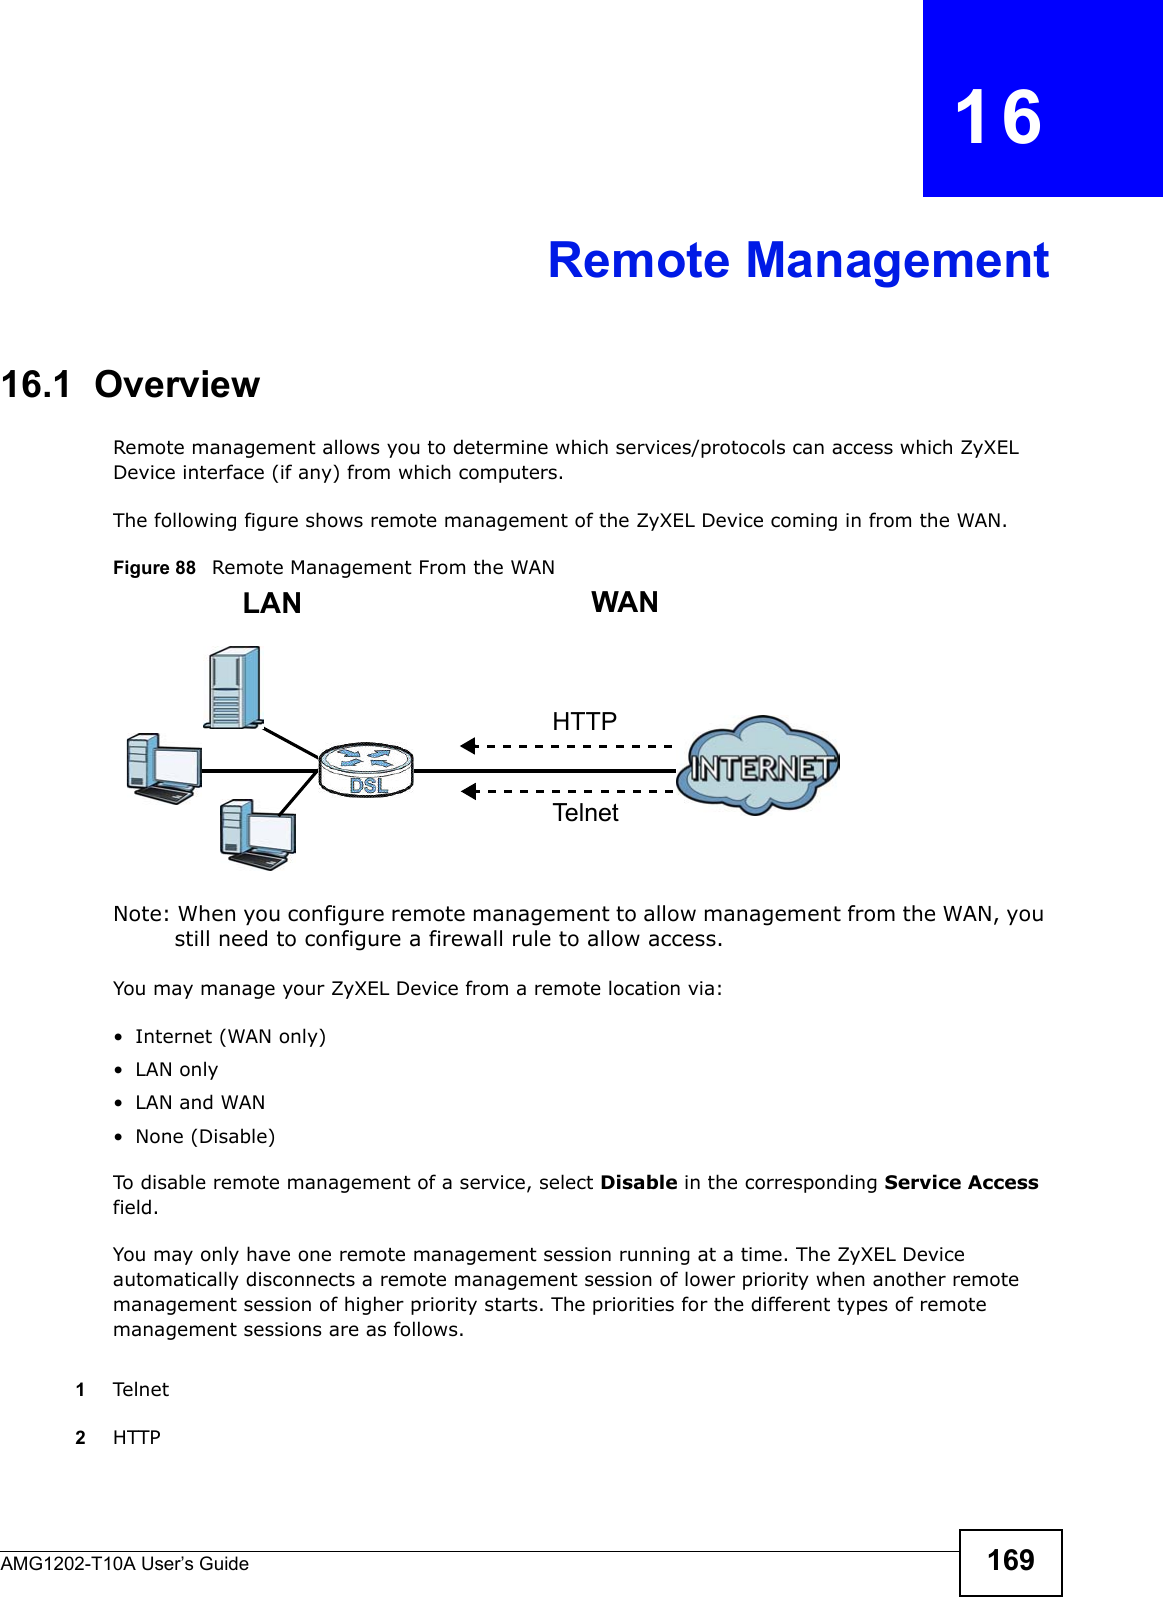 AMG1202-T10A User’s Guide 169CHAPTER   16Remote Management16.1  OverviewRemote management allows you to determine which services/protocols can access which ZyXEL Device interface (if any) from which computers.The following figure shows remote management of the ZyXEL Device coming in from the WAN.Figure 88   Remote Management From the WANNote: When you configure remote management to allow management from the WAN, you still need to configure a firewall rule to allow access.You may manage your ZyXEL Device from a remote location via:• Internet (WAN only)•LAN only•LAN and WAN• None (Disable)To disable remote management of a service, select Disable in the corresponding Service Access field.You may only have one remote management session running at a time. The ZyXEL Device automatically disconnects a remote management session of lower priority when another remote management session of higher priority starts. The priorities for the different types of remote management sessions are as follows.1Telnet2HTTPLAN WANHTTPTelnet